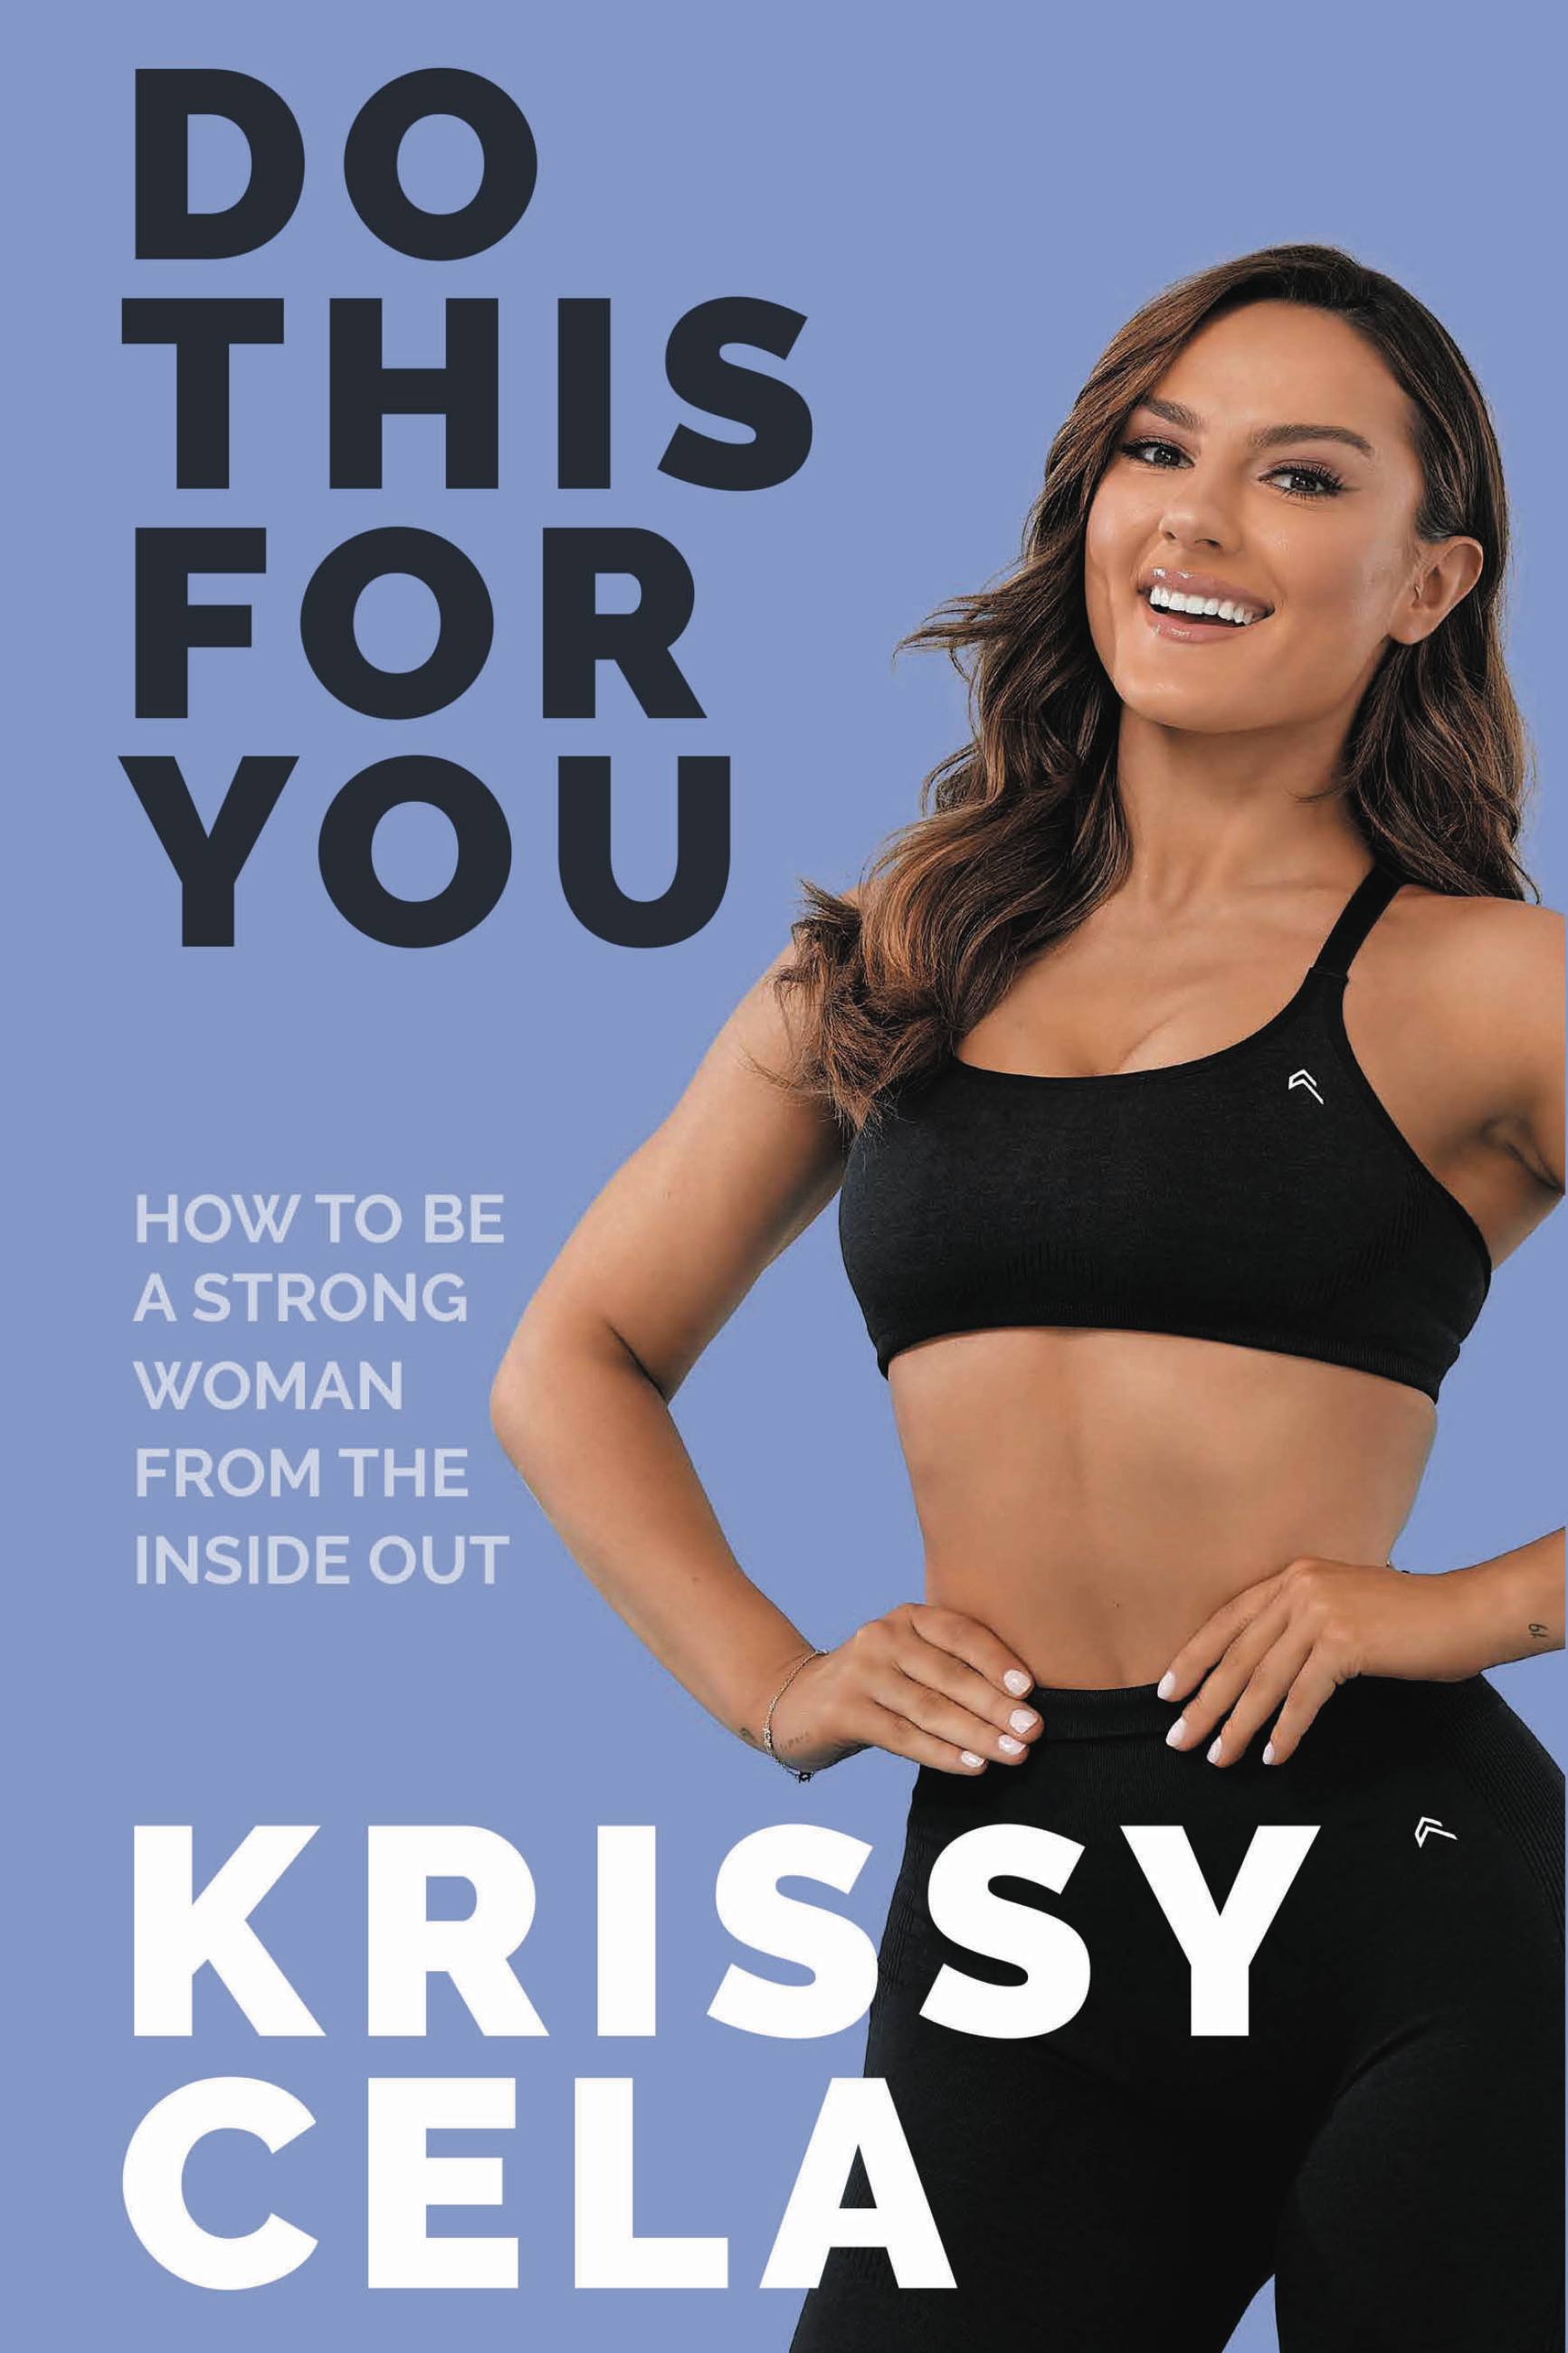 Do This For You by Krissy Cela